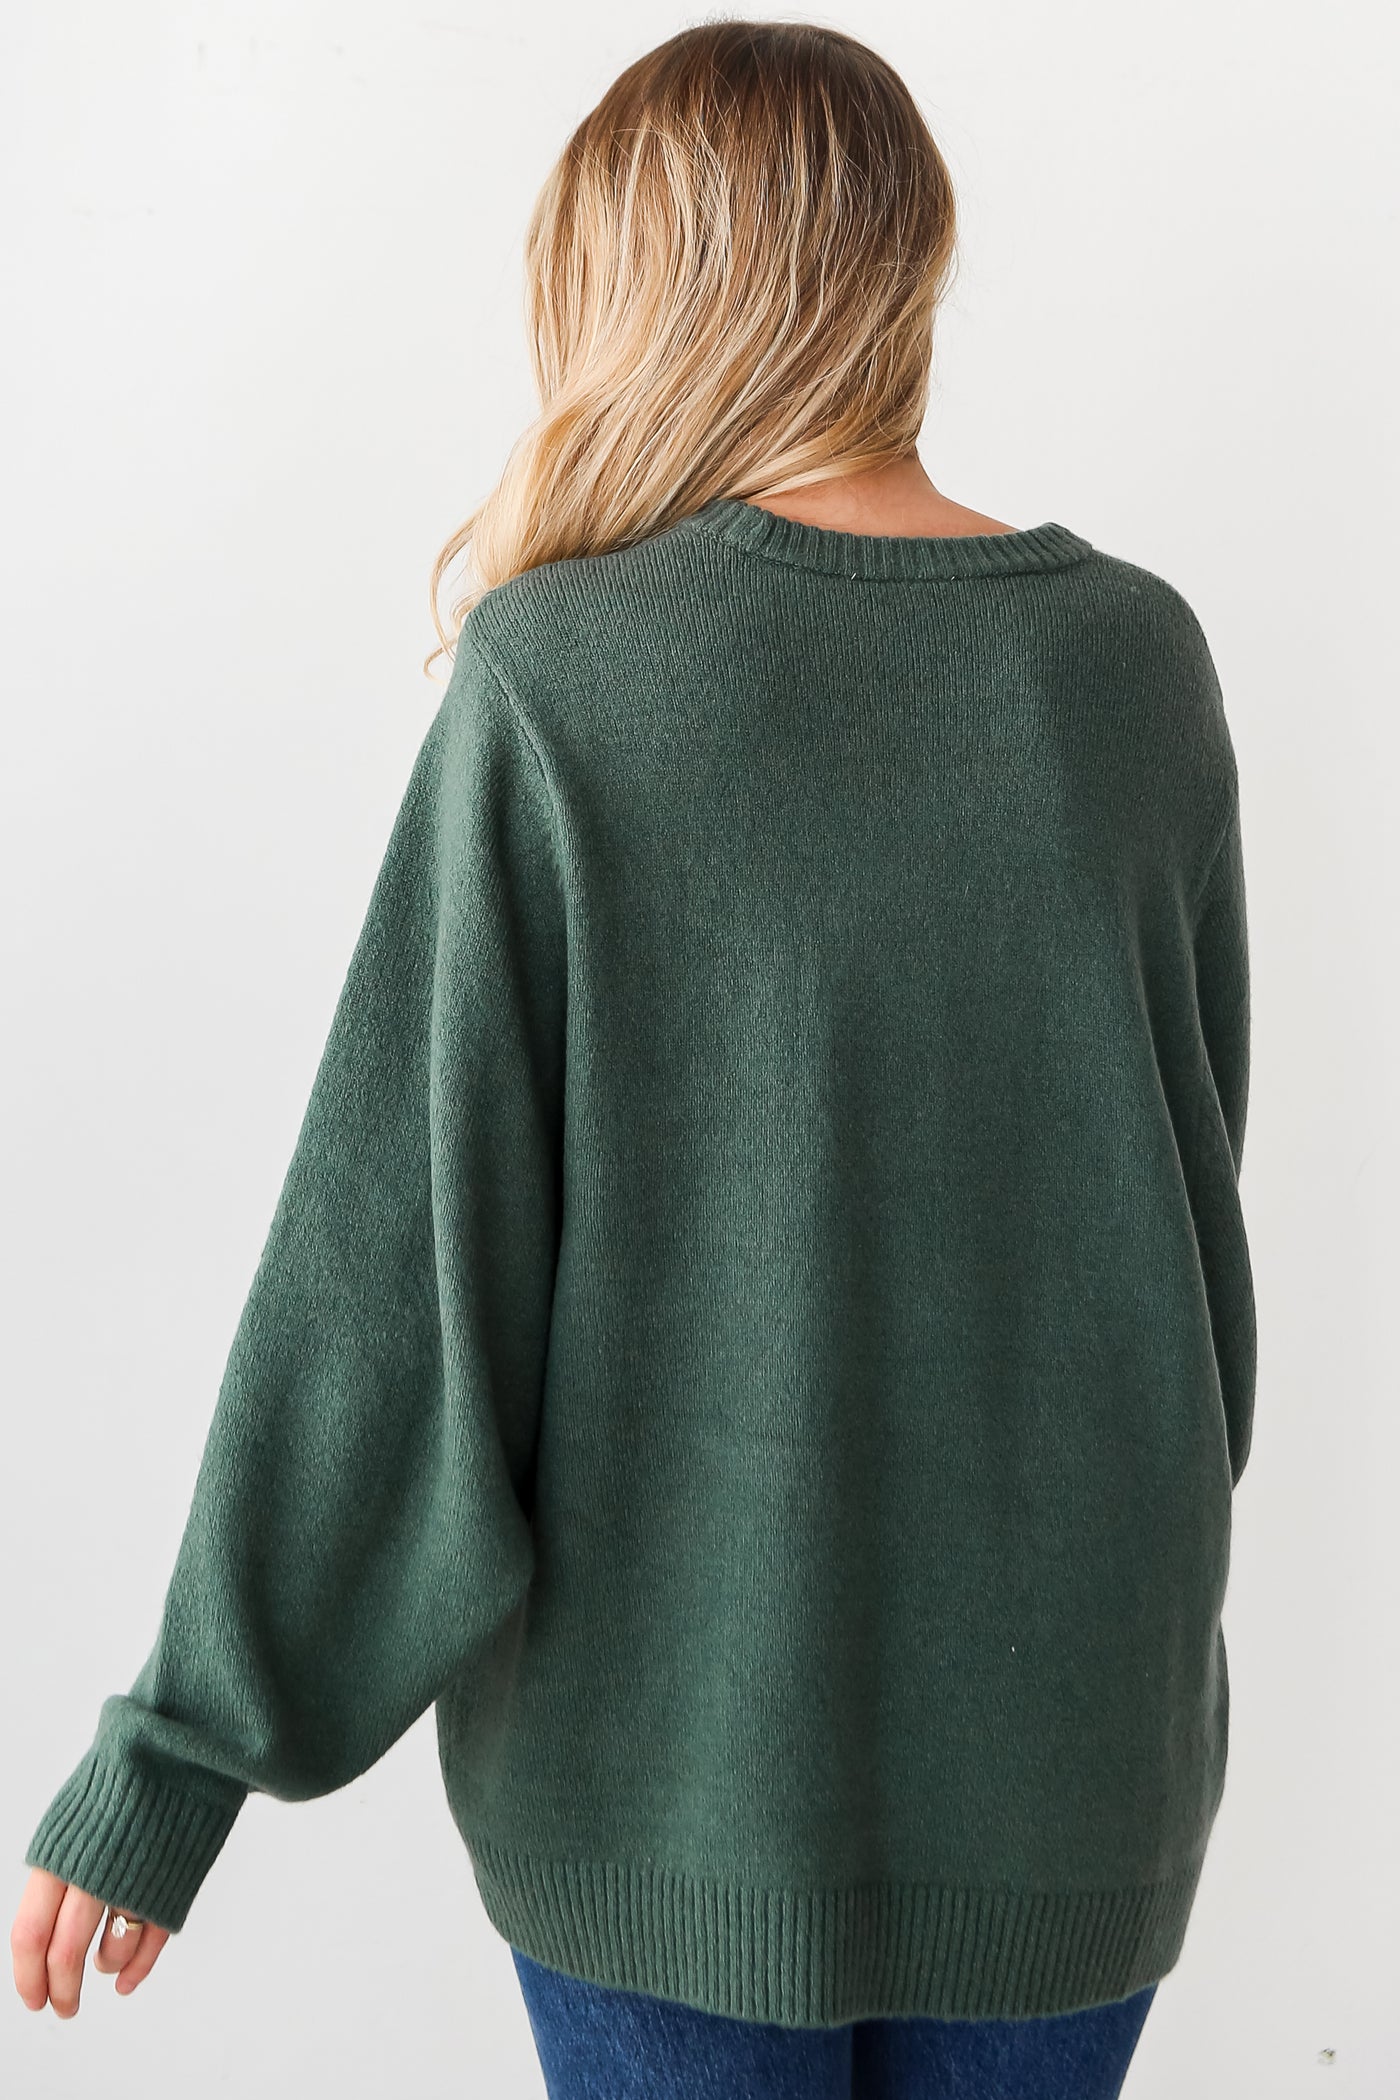 green Oversized Sweater back view